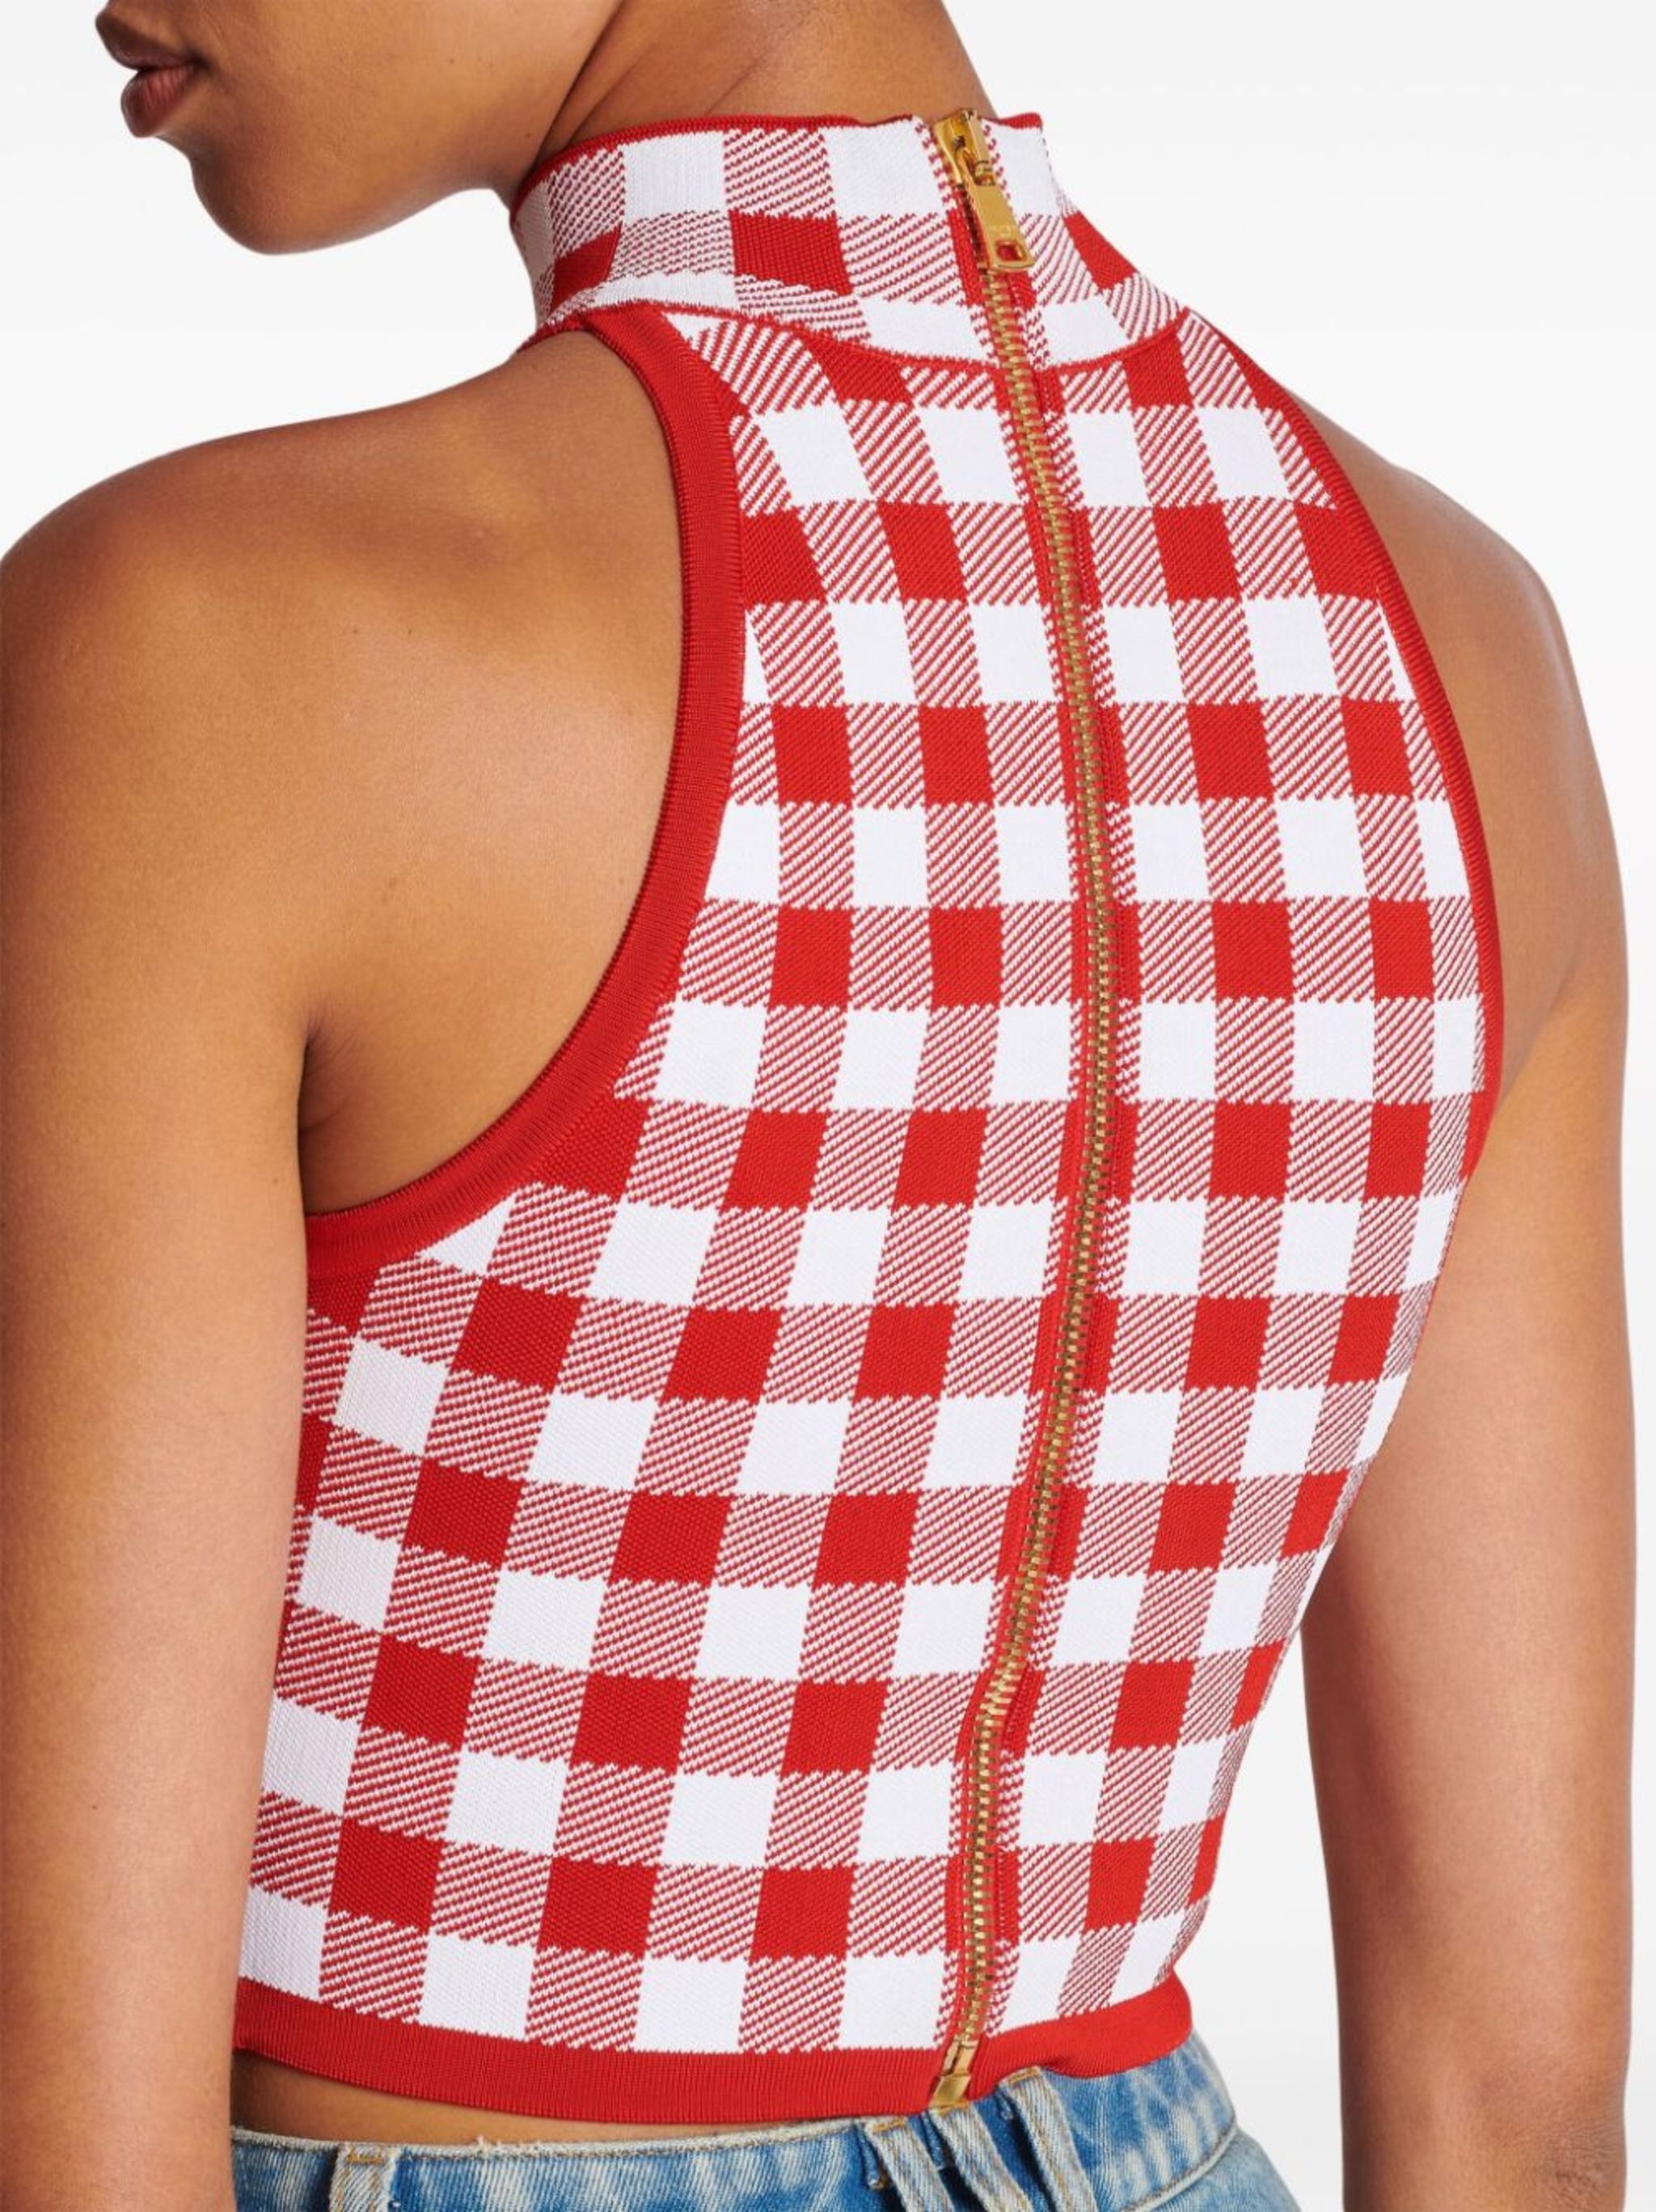 gingham-check pattern zip-up top - 7